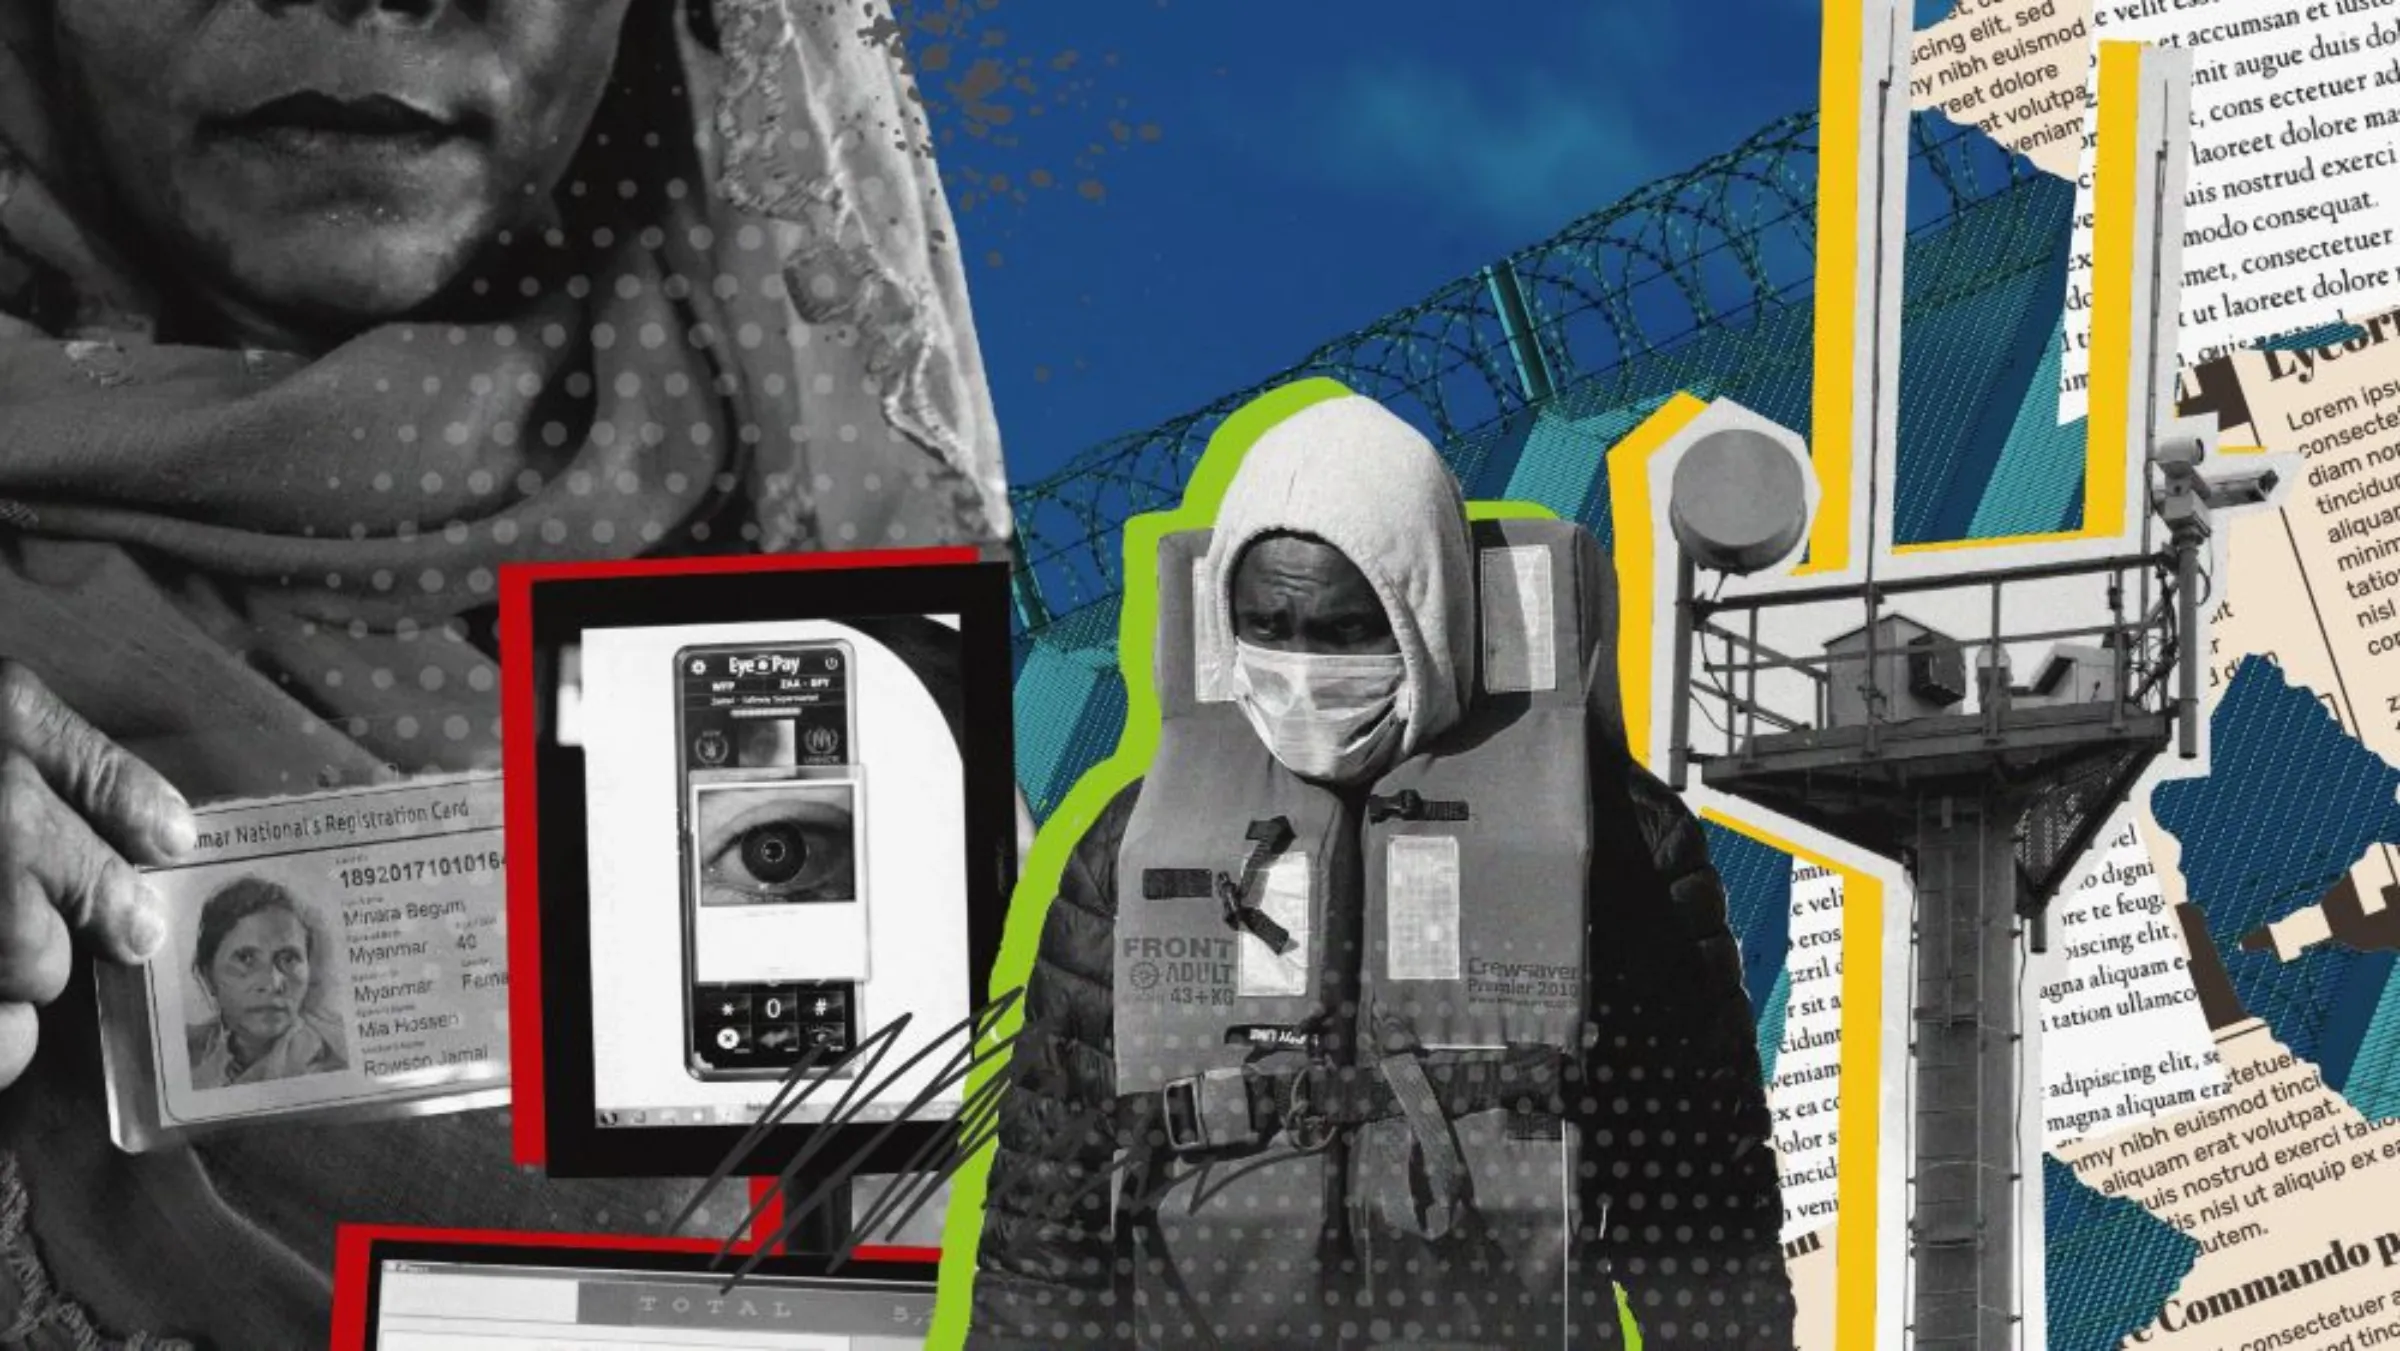 An illustration photo shows - from left to right - a woman holding a national identity card, an eye on a phone screen, a man in a mask and a life vest, and a surveillance tower on a background of newspaper clippings and barbed wire. Thomson Reuters Foundation/Nura Ali